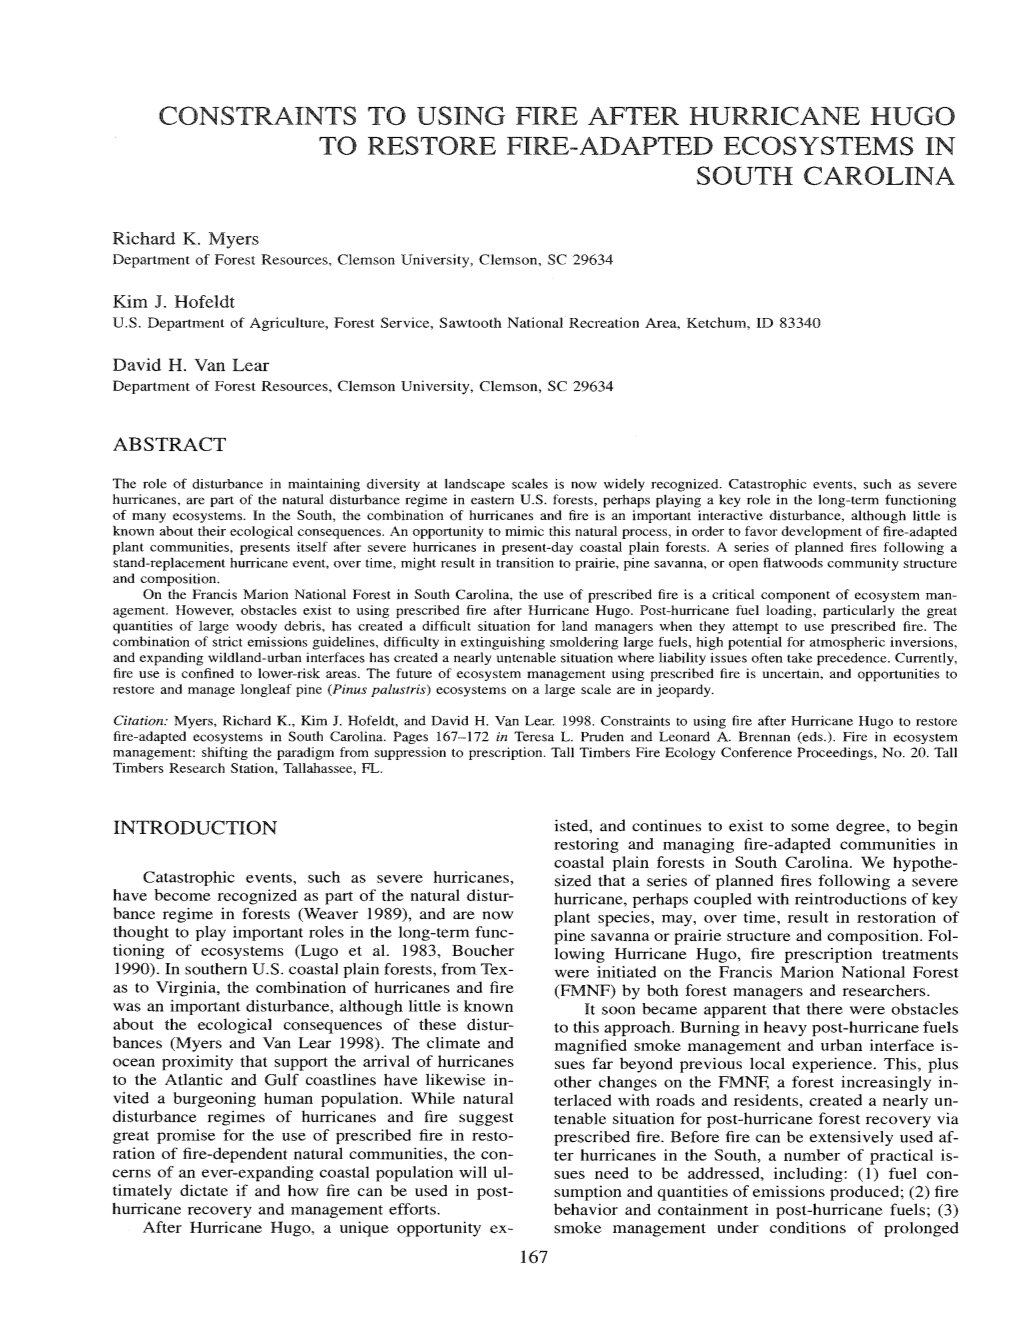 Constraints to Using Fire After Hurricane Hugo to Restore Fire-Adapted Ecosystems in South Carolina